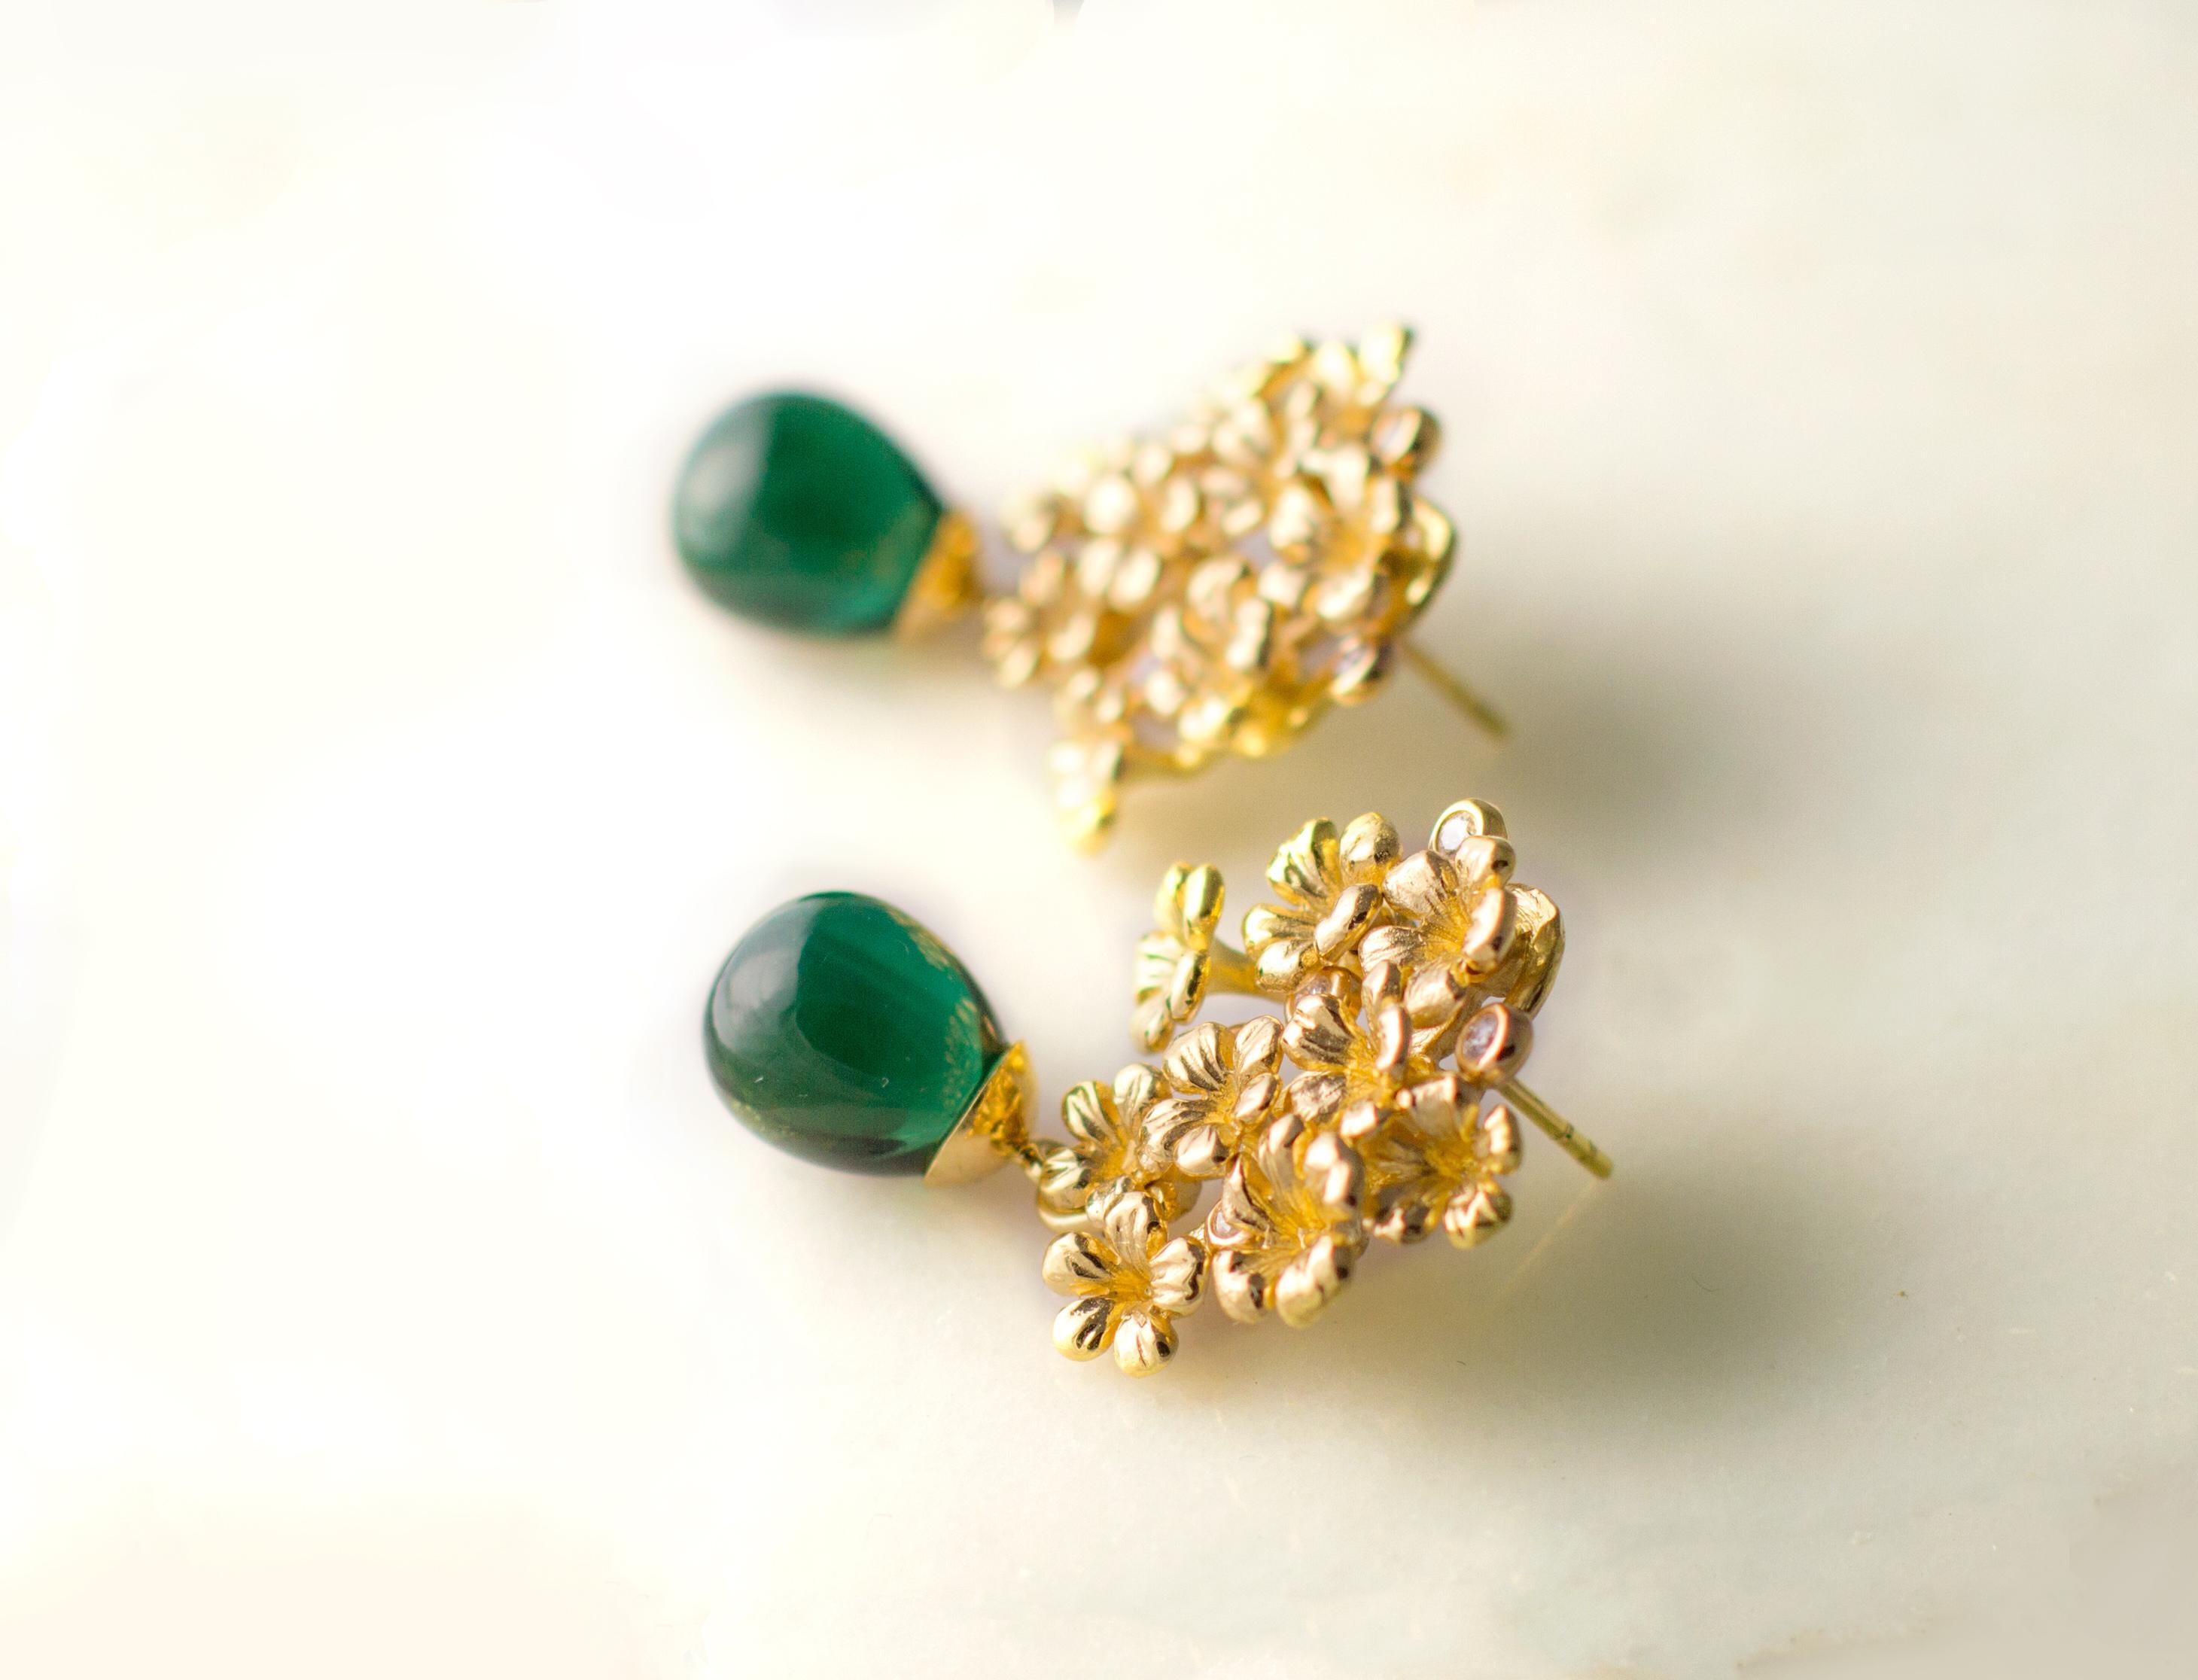 This Plum Flowers contemporary cocktail drop earrings with natural detachable emeralds are crafted from 18-karat yellow gold and adorned with 10 round diamonds. The emeralds are 9.5 x 7 x 6mm each, with a total weight of approximately 6 carats. This